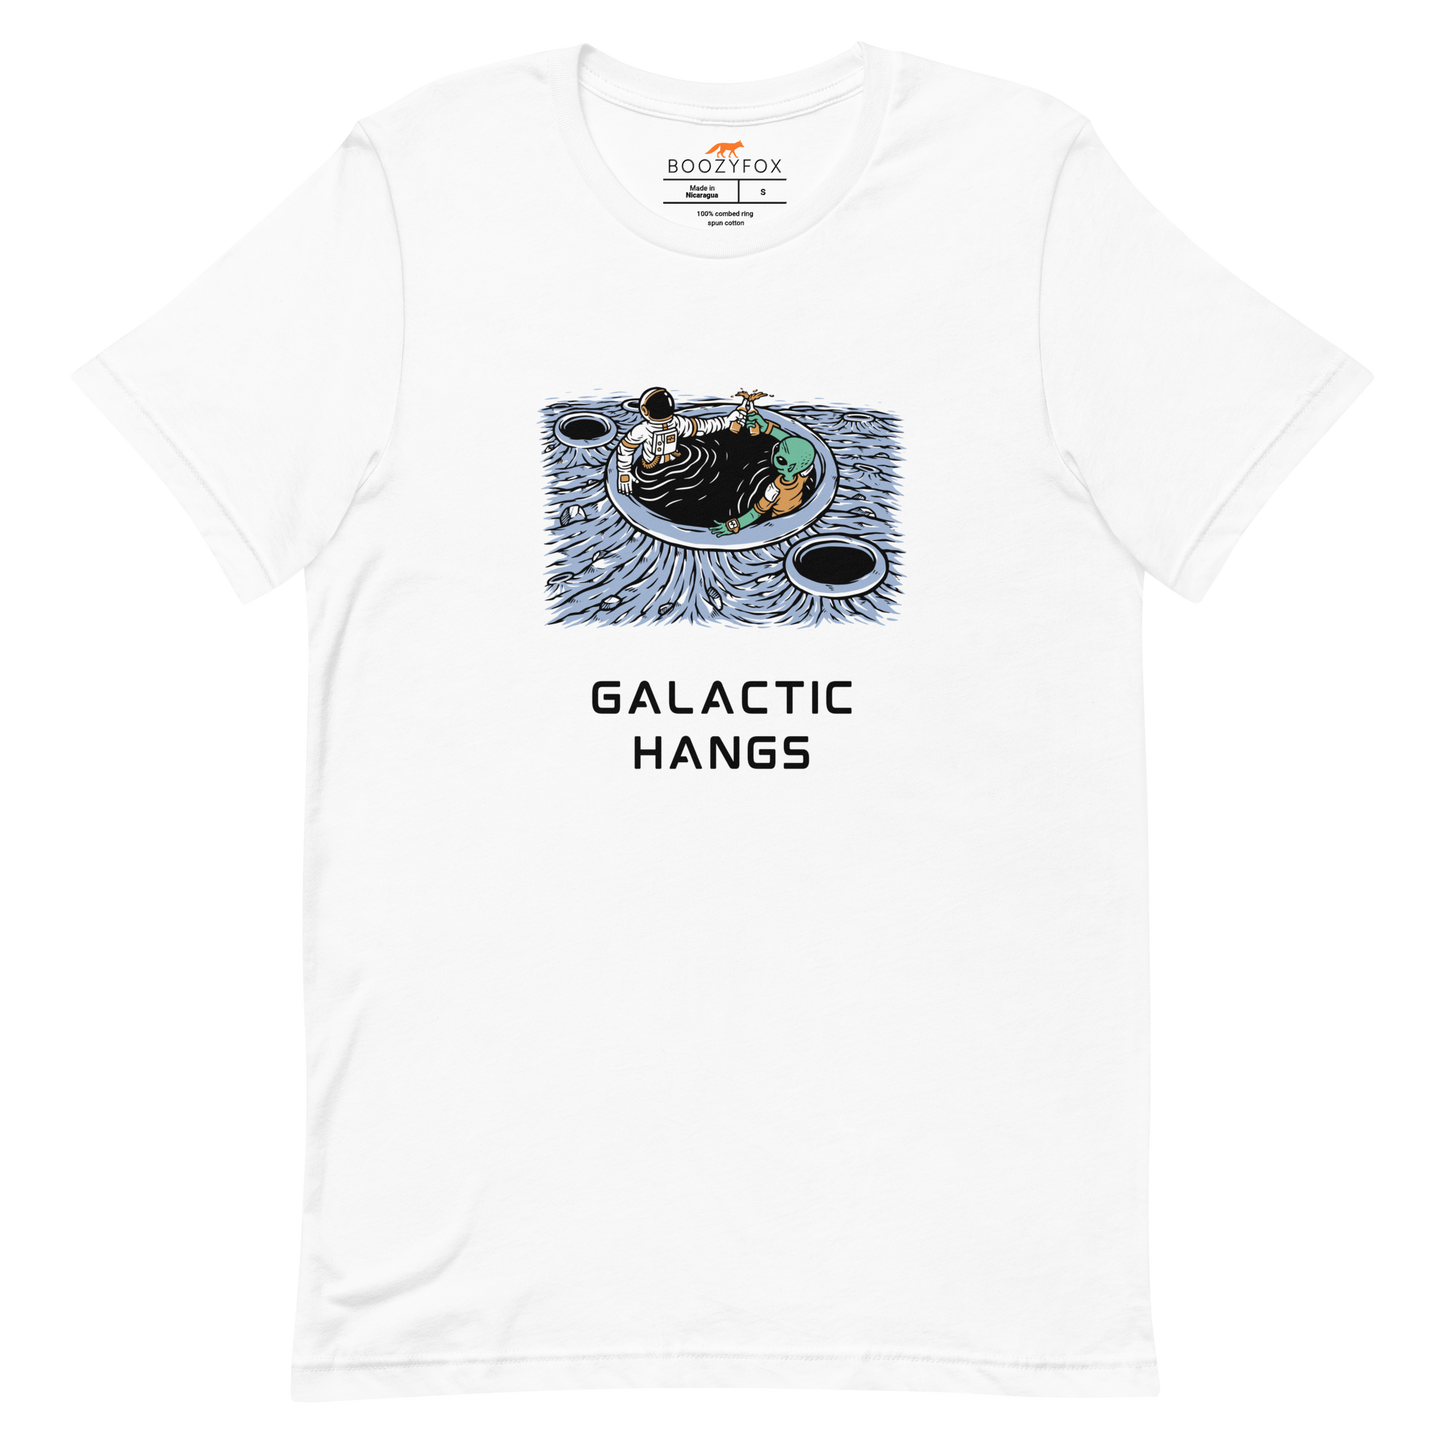 White Premium Galactic Hangs Tee featuring an out-of-this-world graphic of an Astronaut and Alien Chilling Together - Funny Graphic Space Tees - Boozy Fox